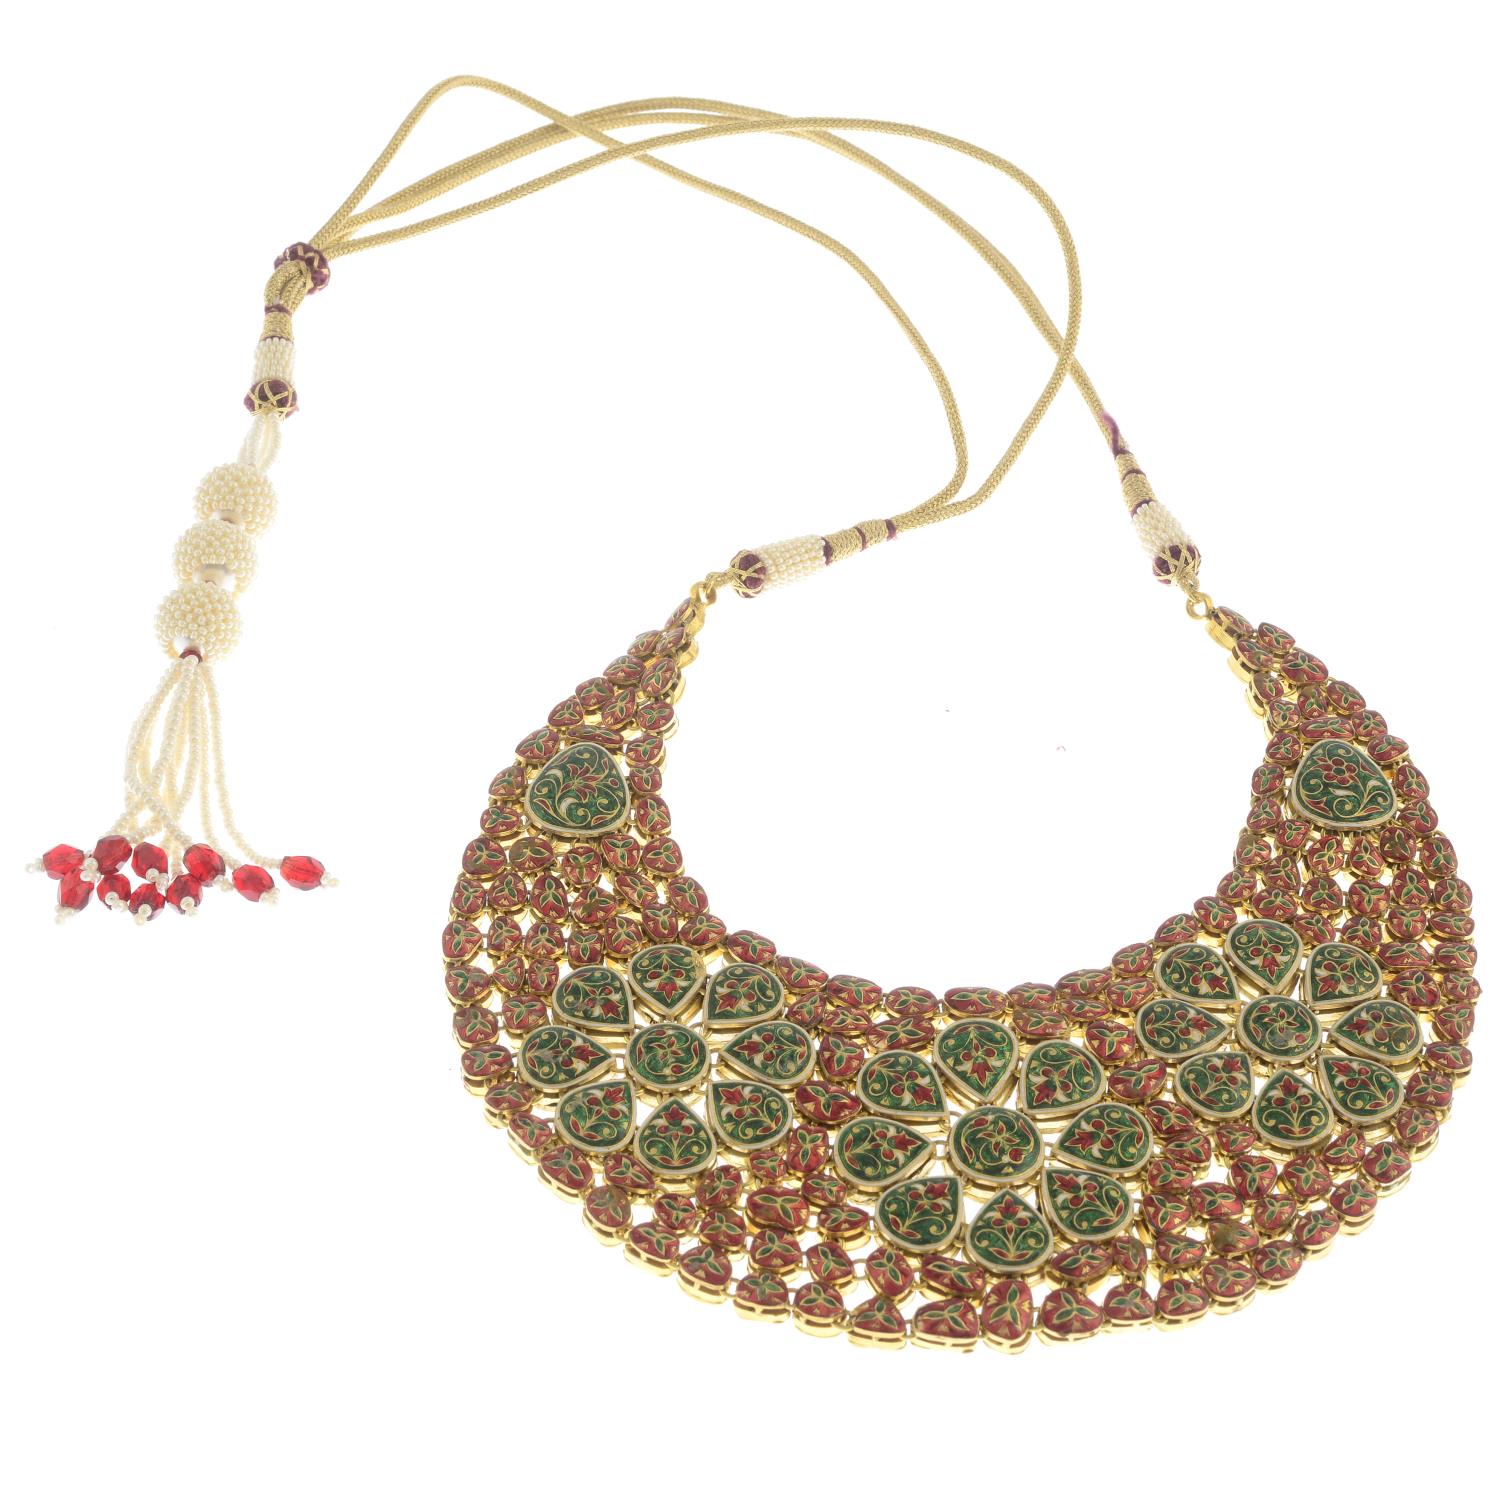 A foil-back diamond and enamel cluster necklace, with woven cord and bead back-chain. - Image 4 of 4